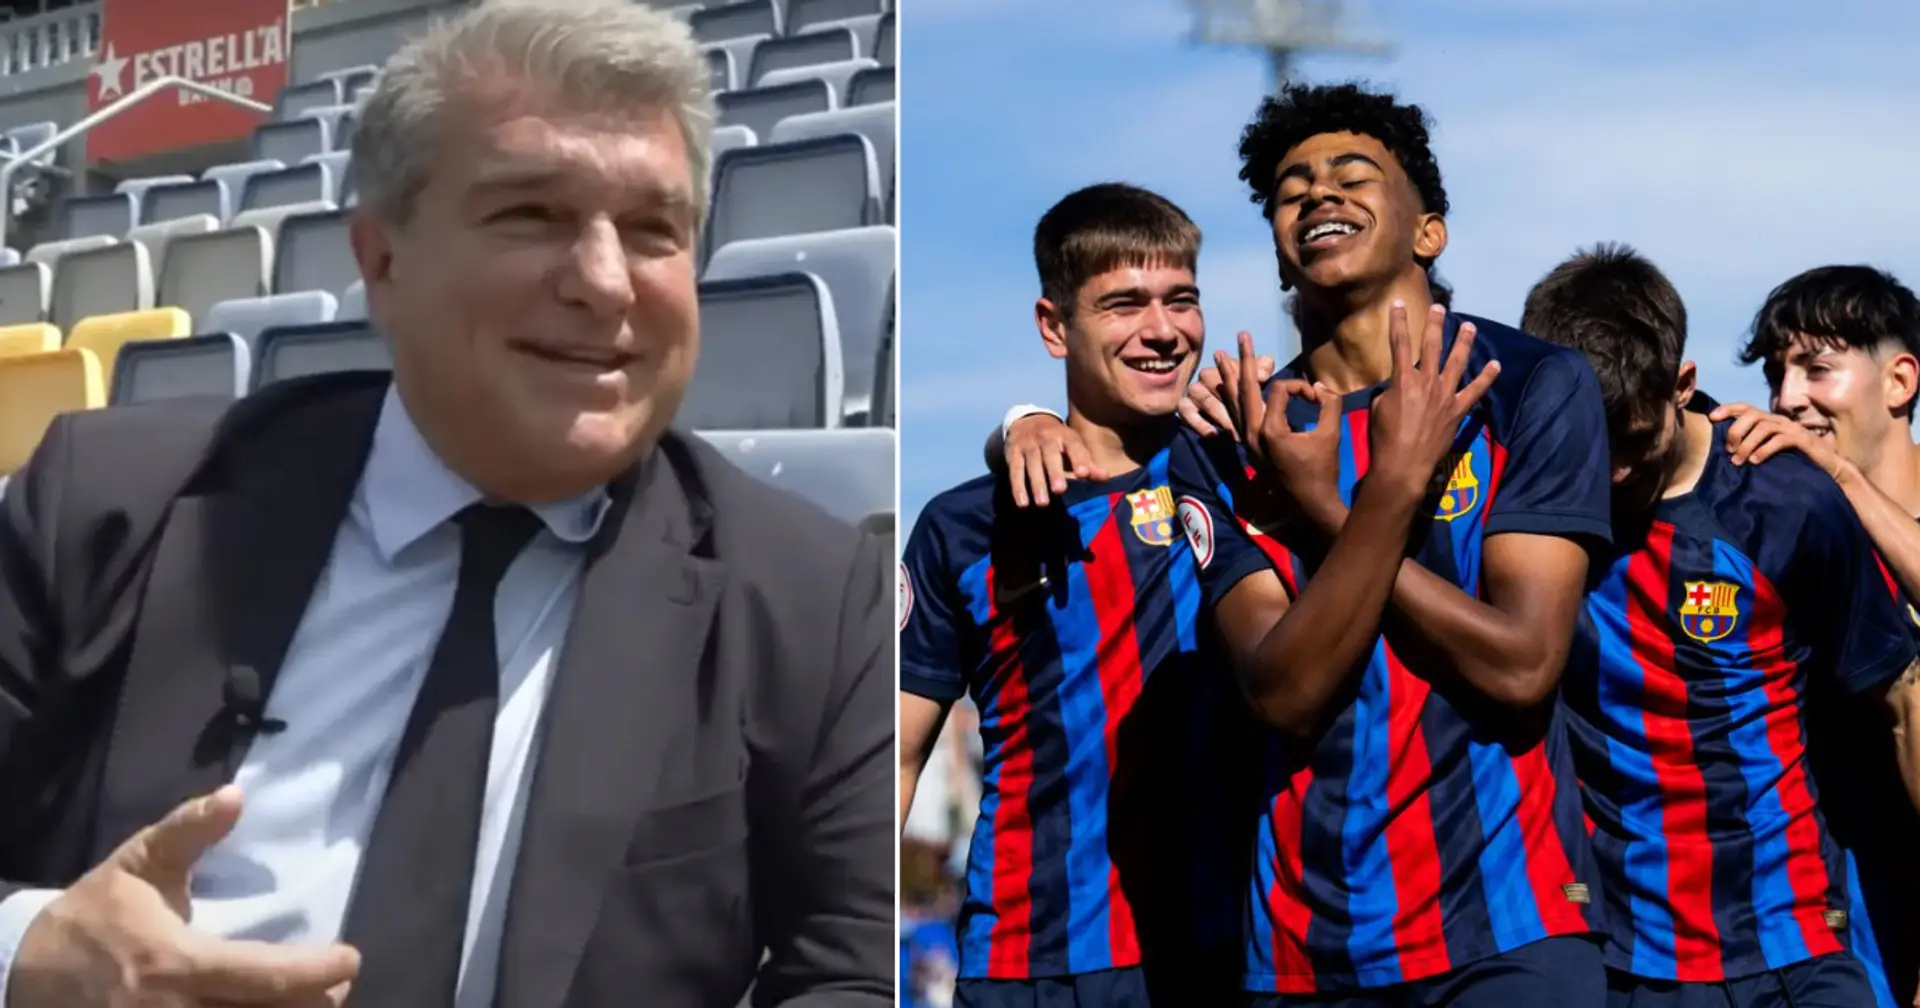 'Crazy bids': President Laporta confirms Barca received €200m offer for Lamine Yamal